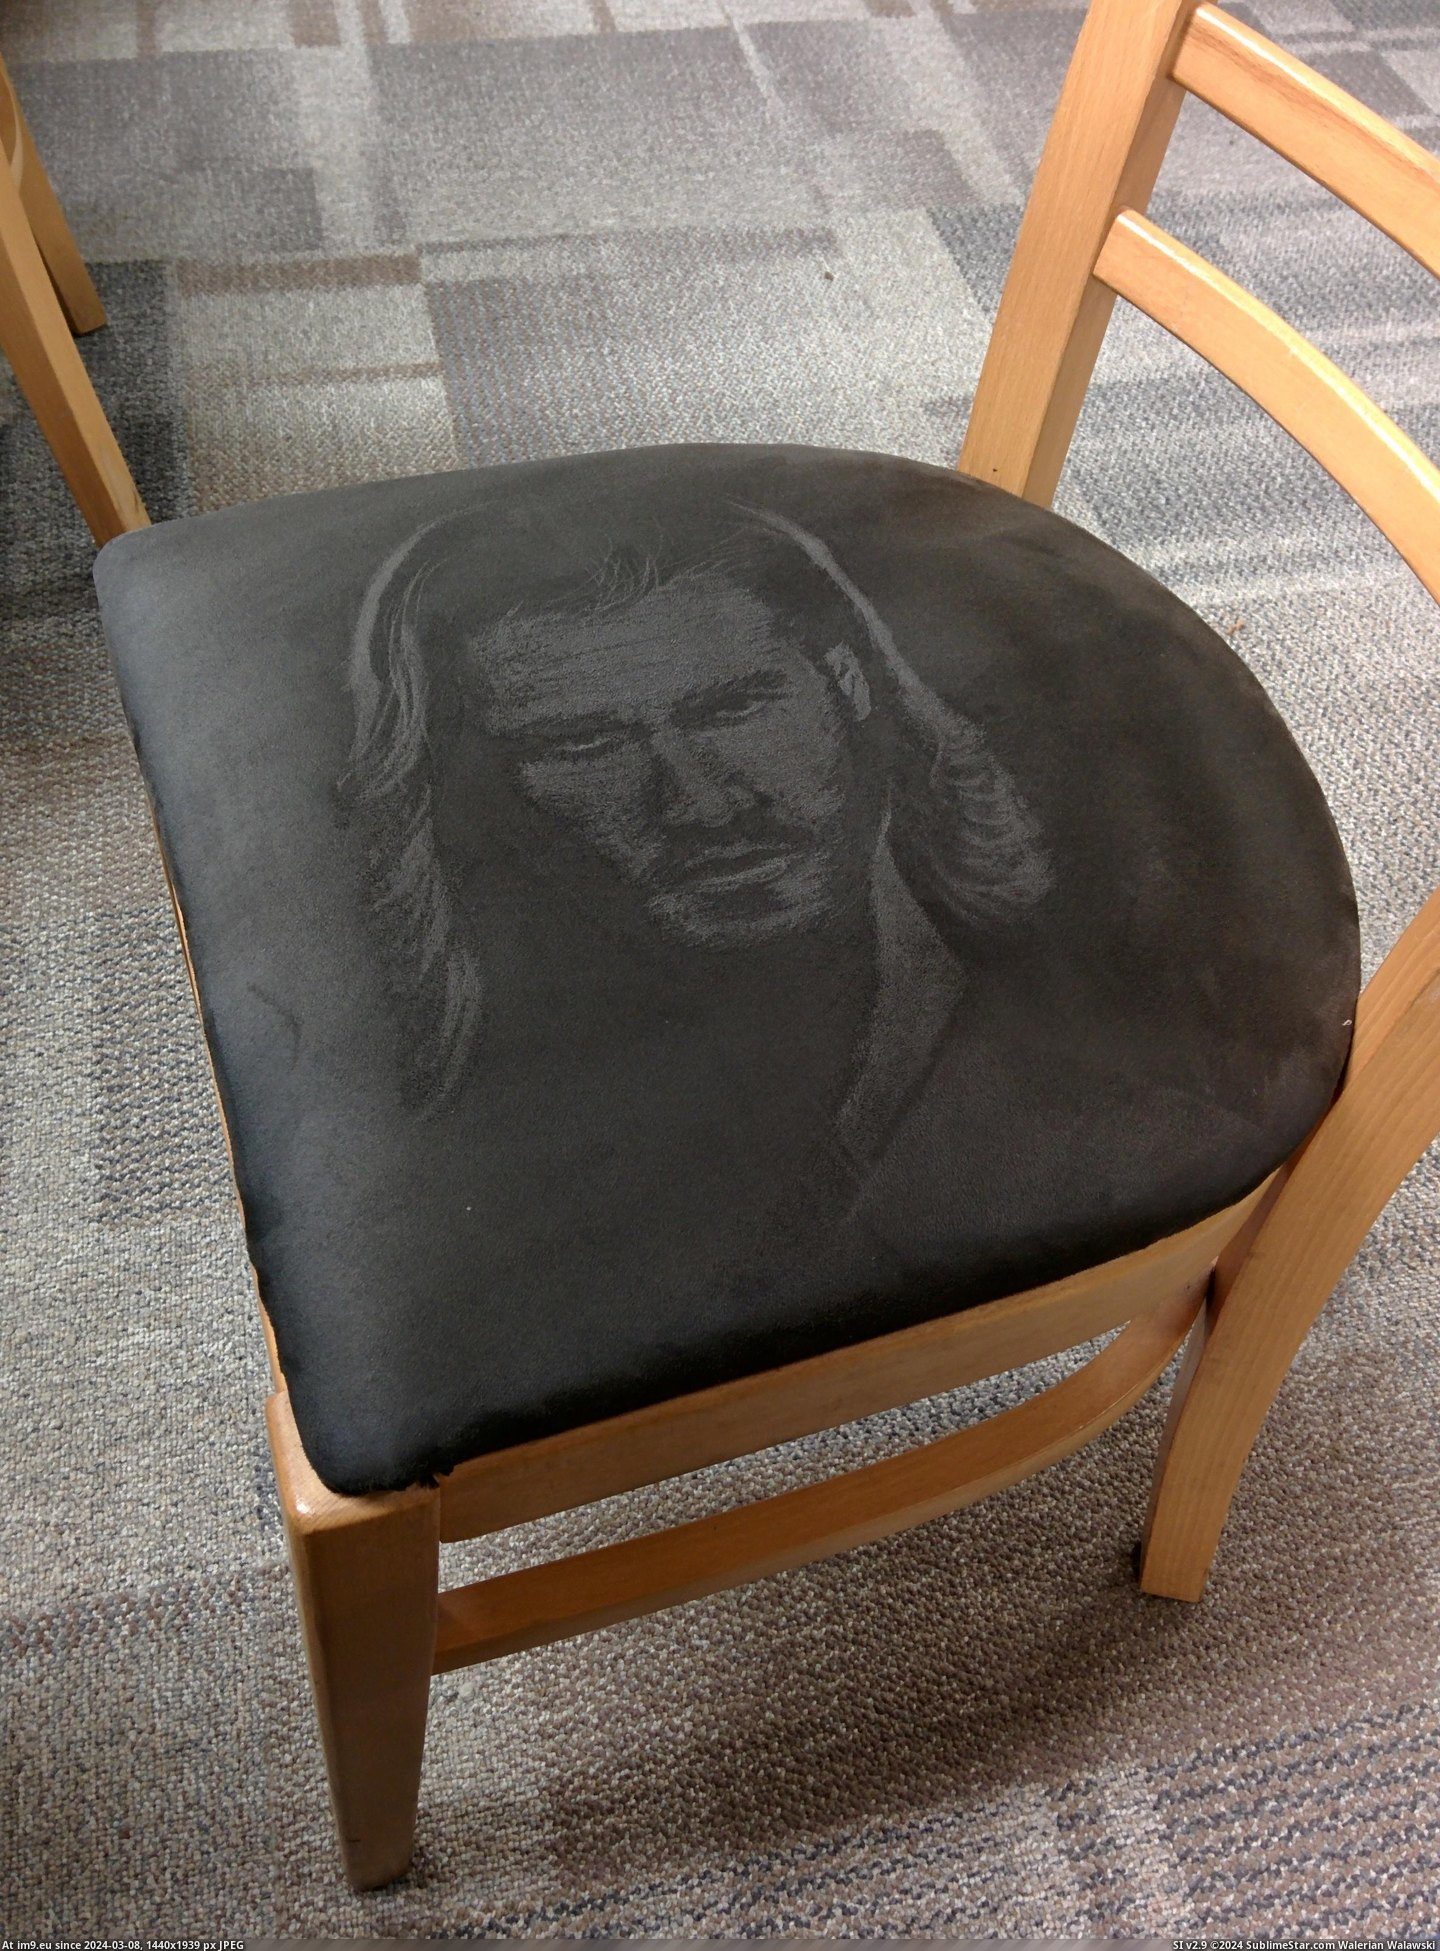 #Chair #Thor #Suede #Drew [Pics] Someone drew Thor on a suede chair Pic. (Image of album My r/PICS favs))